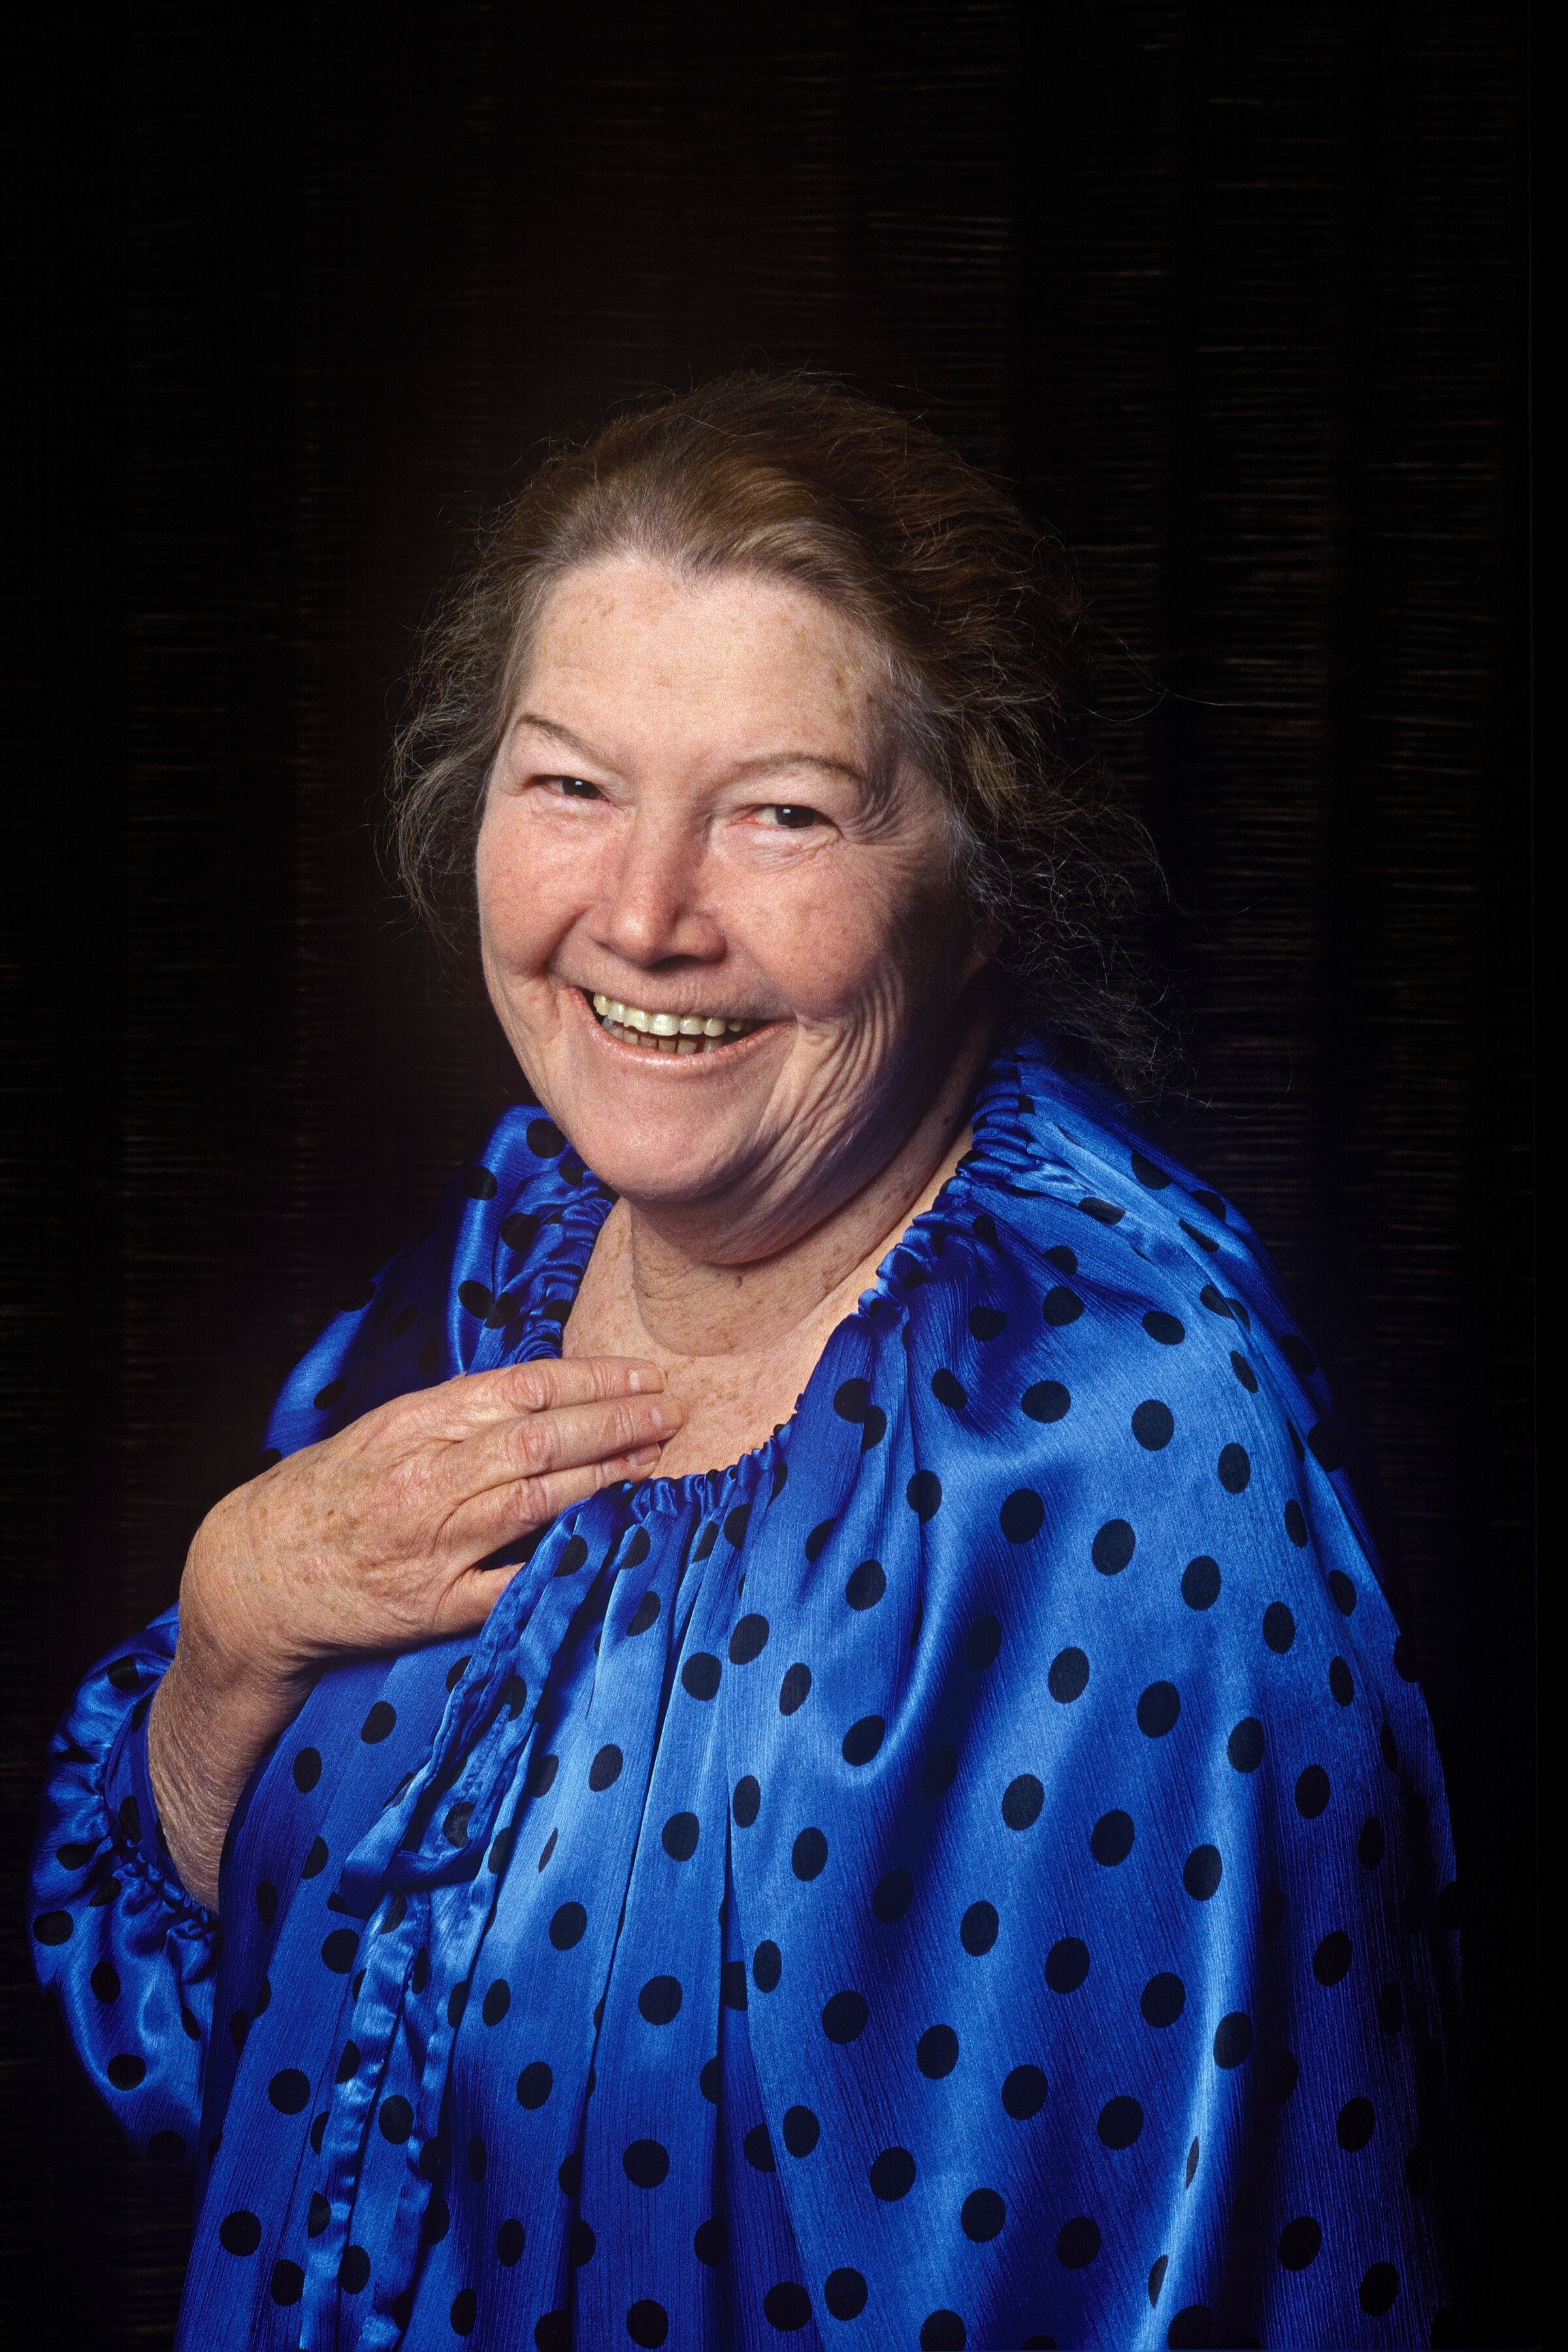 Colleen McCullough / Source : Getty Images